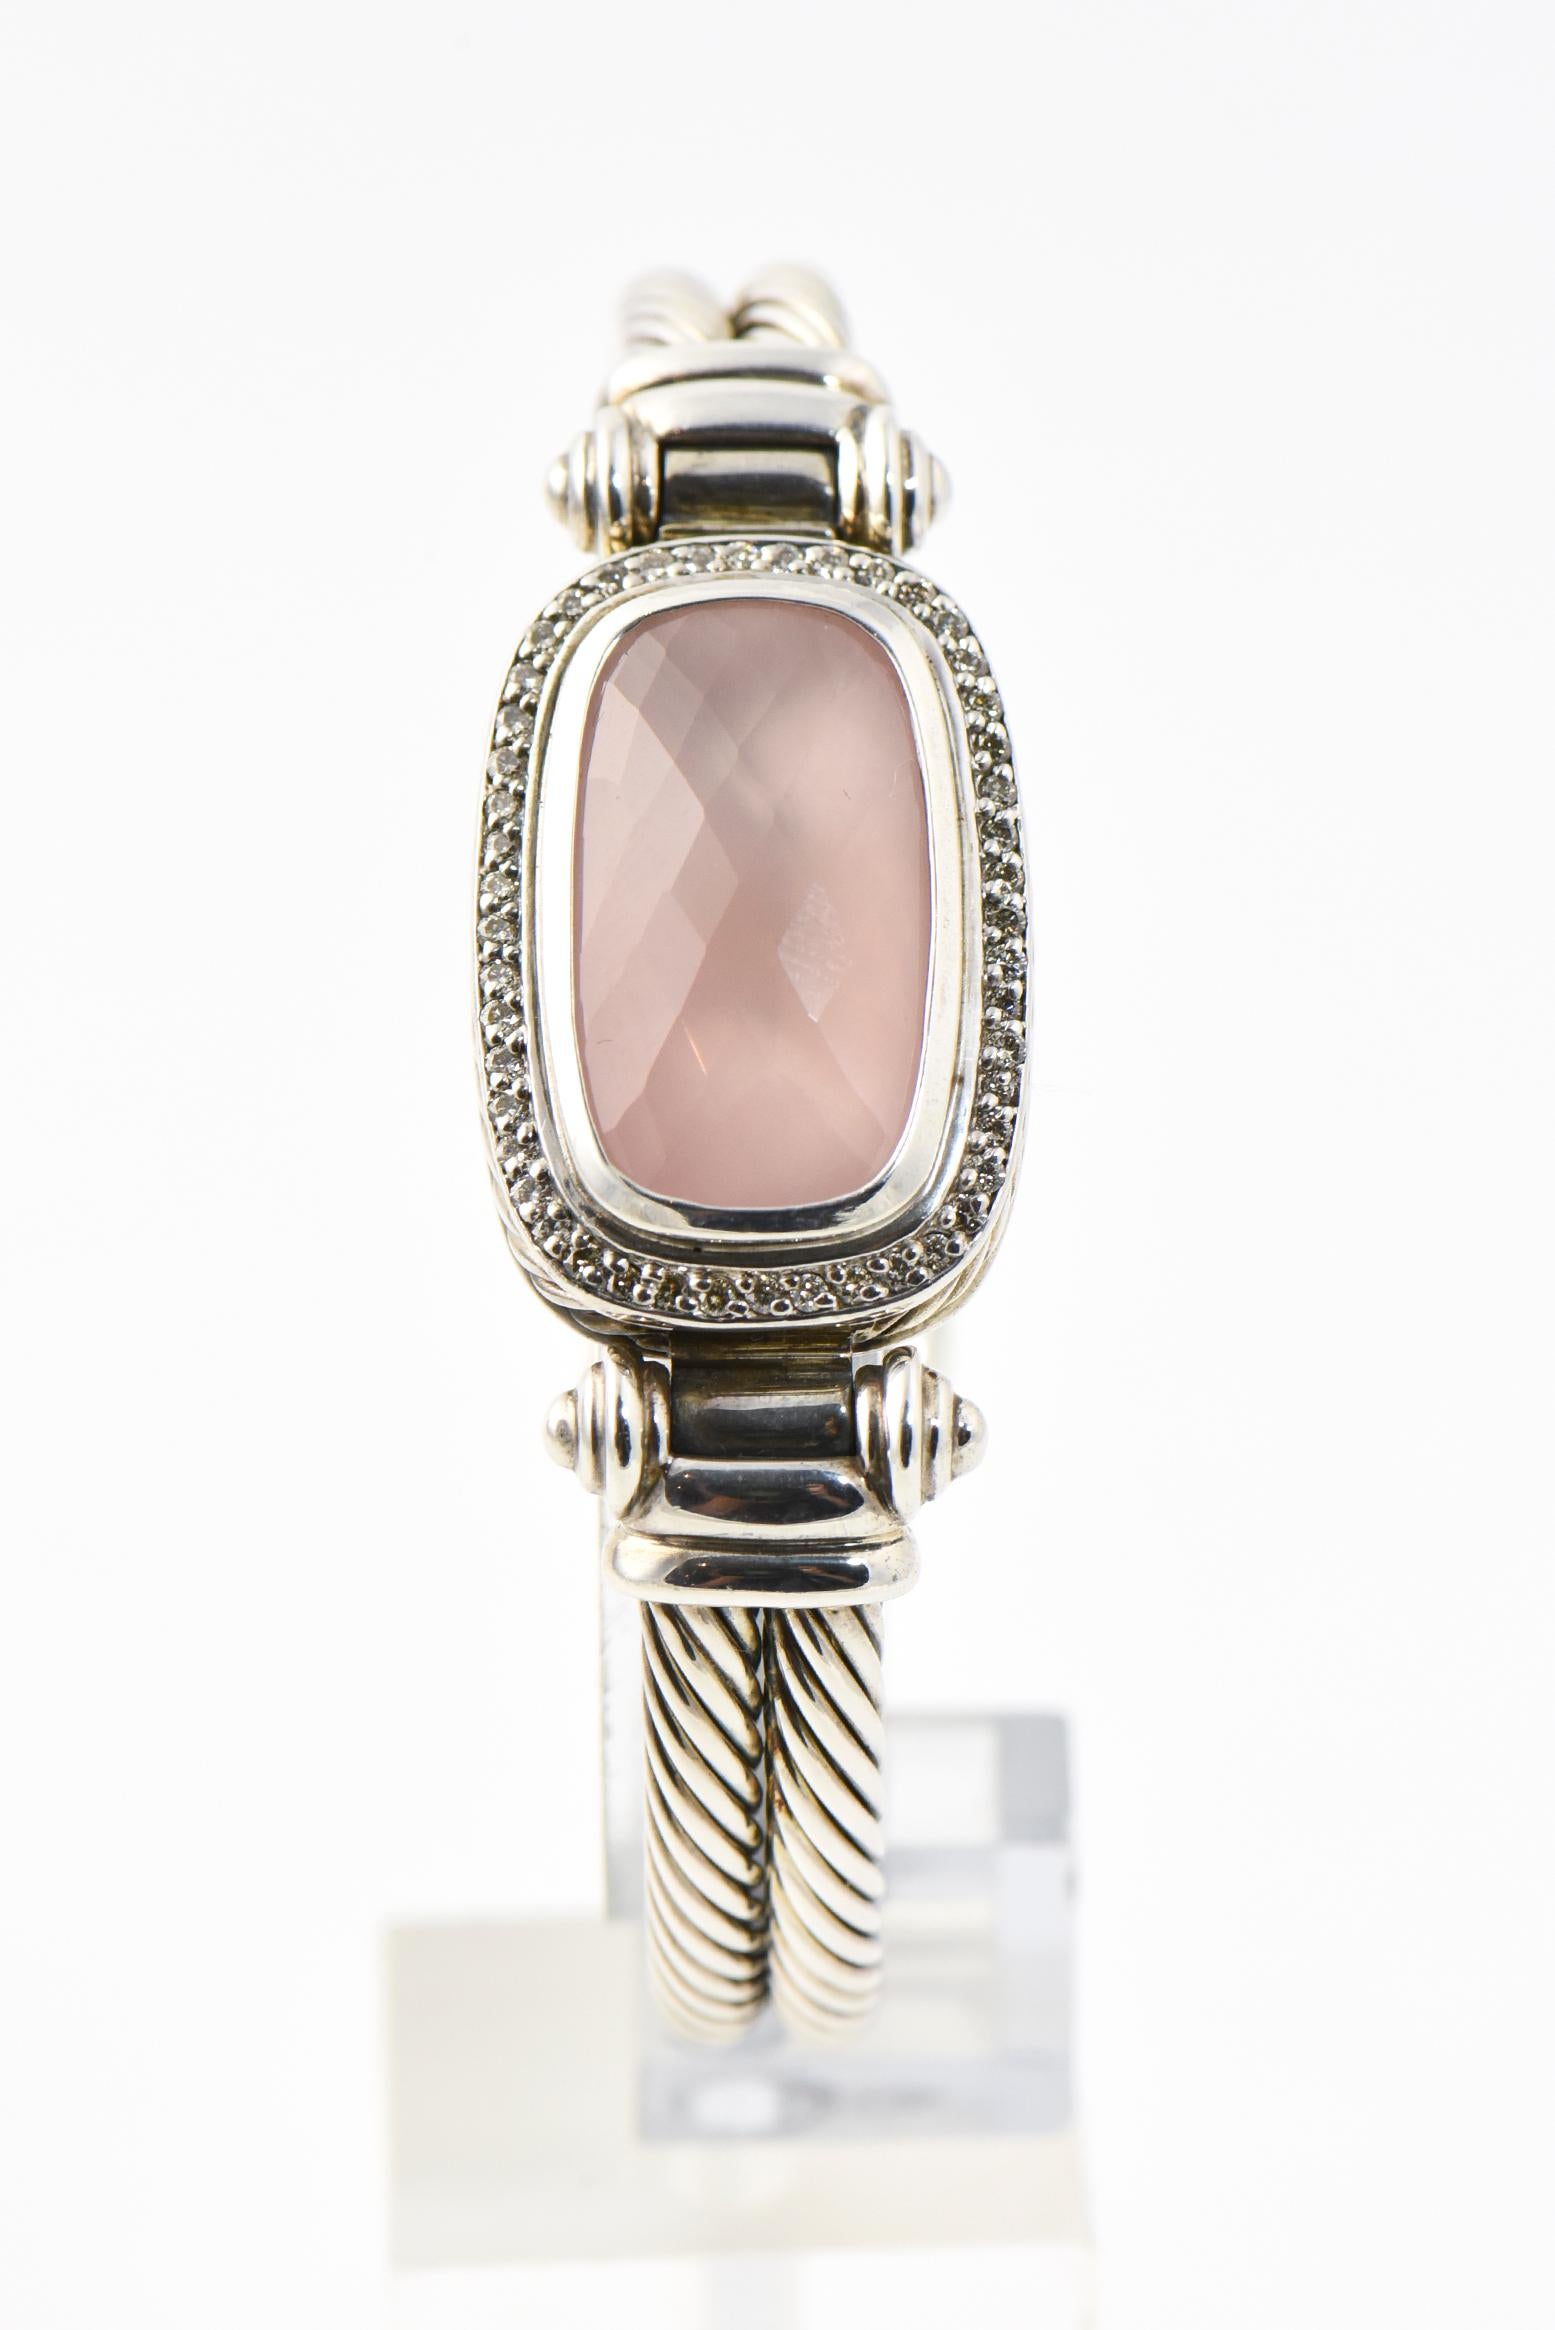 DY Double thin sterling cable bangle with large rectanglular center section featuring a rectangular facetted rose quartz with a pave diamond frame. The double cable area is 7.8mm wide. The stone area is 18.9 mm wide with a flush clasp that is opened